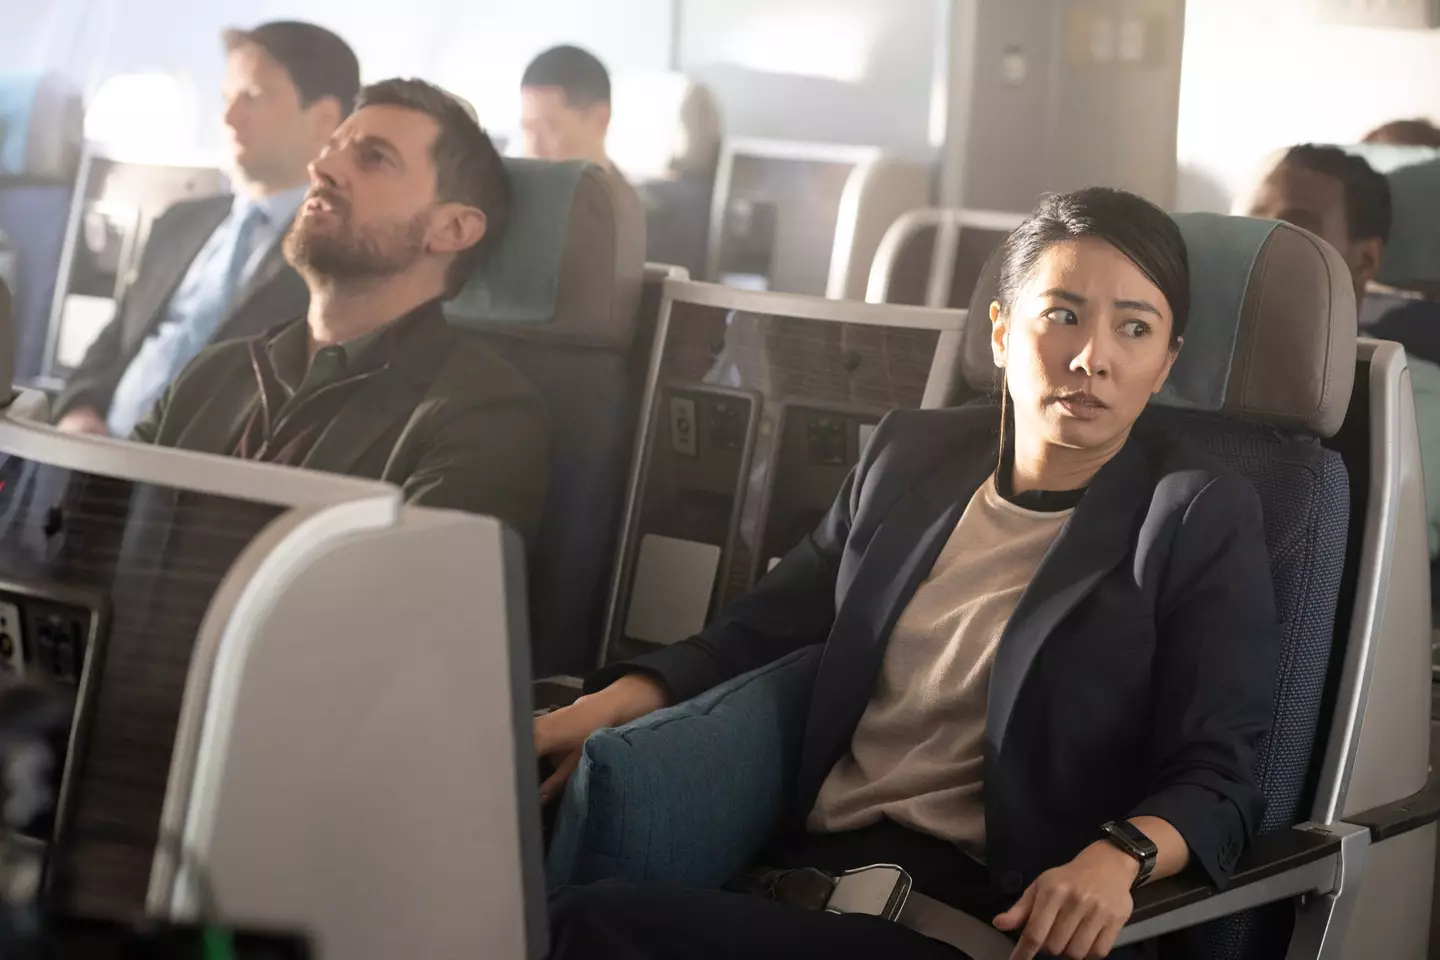 Richard Armitage and Jing Lusi star in the upcoming ITV drama.